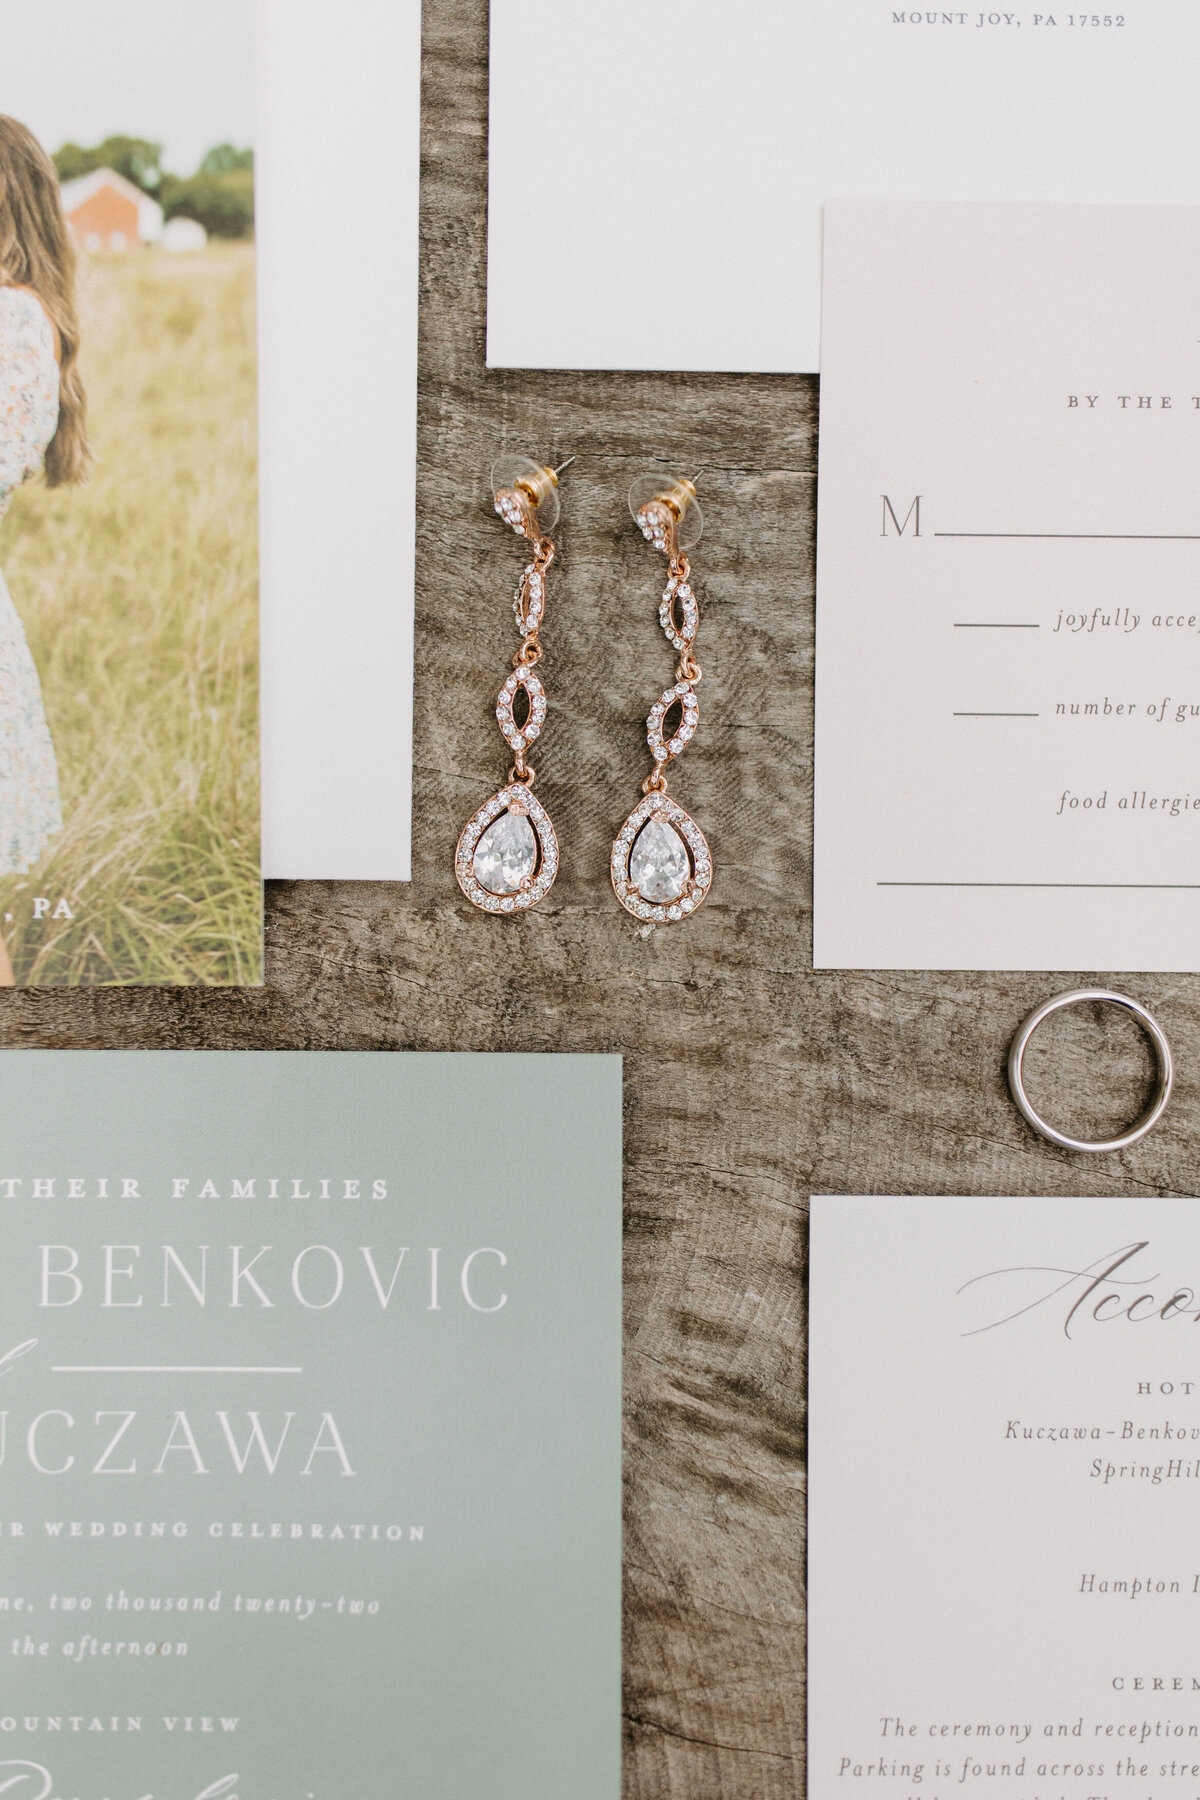 wedding invitations, earrings, and rings laid out on a wooden table